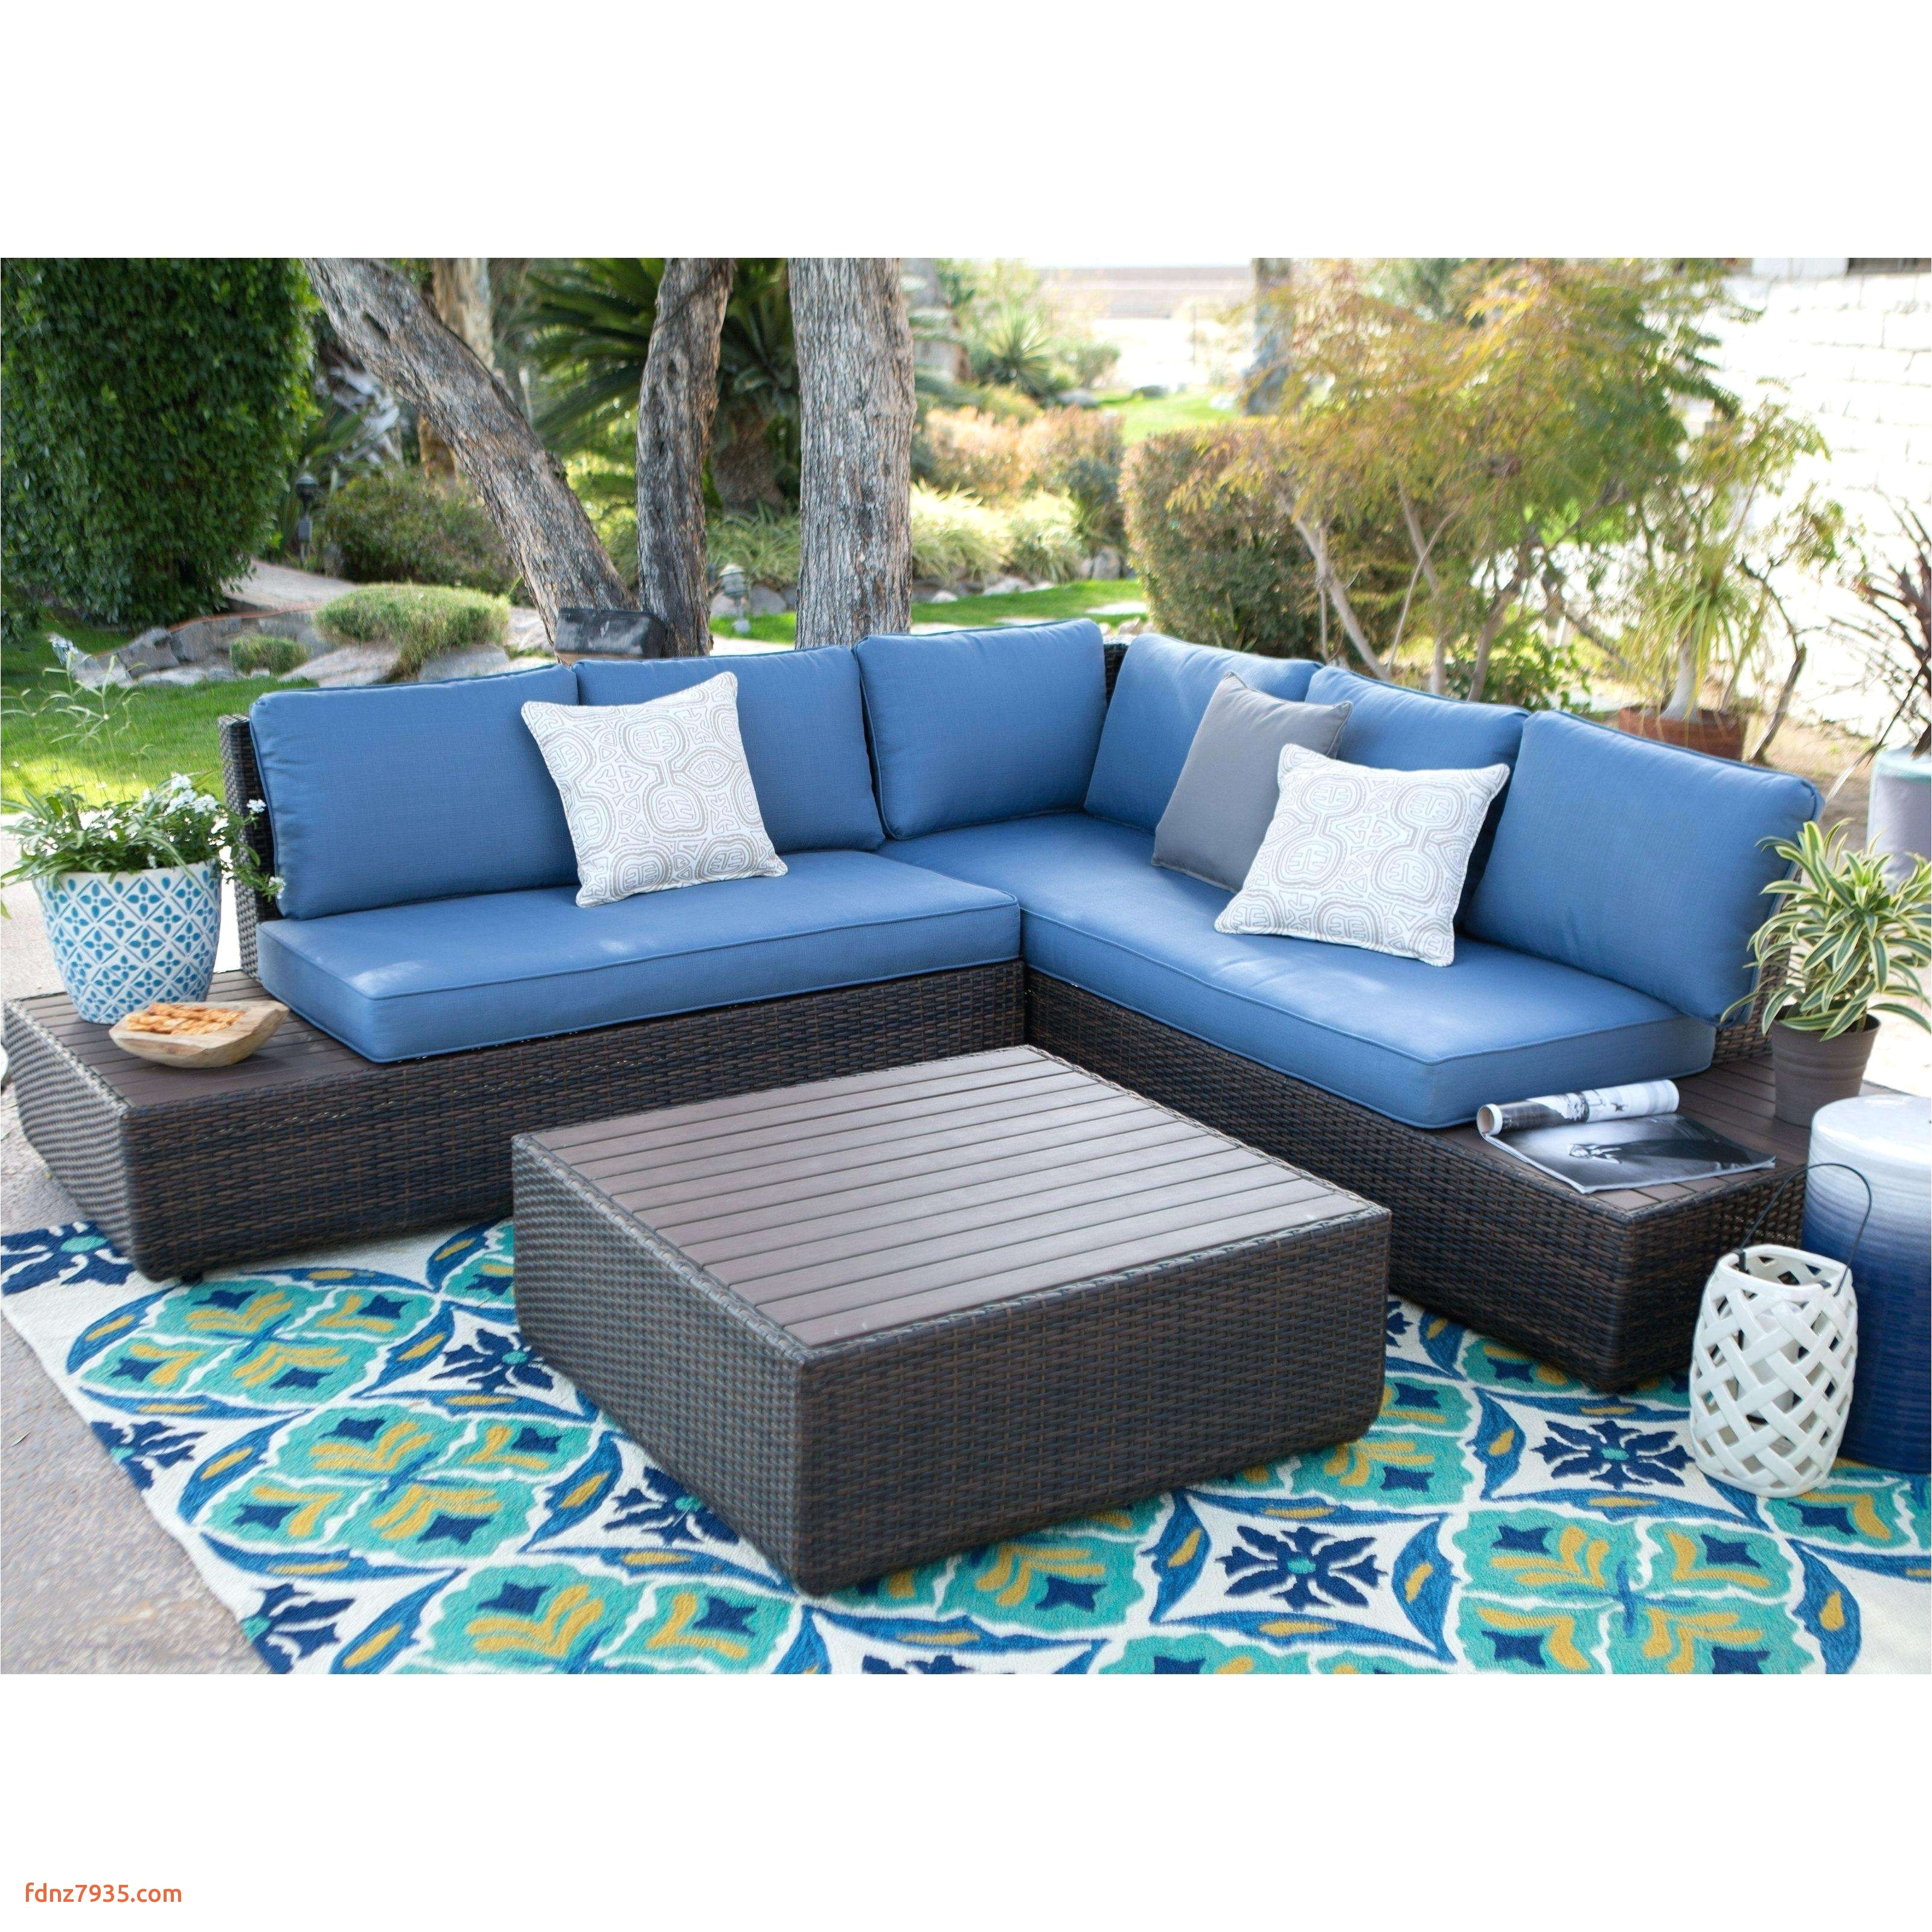 2 chair patio set elegant wicker outdoor sofa 0d patio chairs sale replacement cushions design